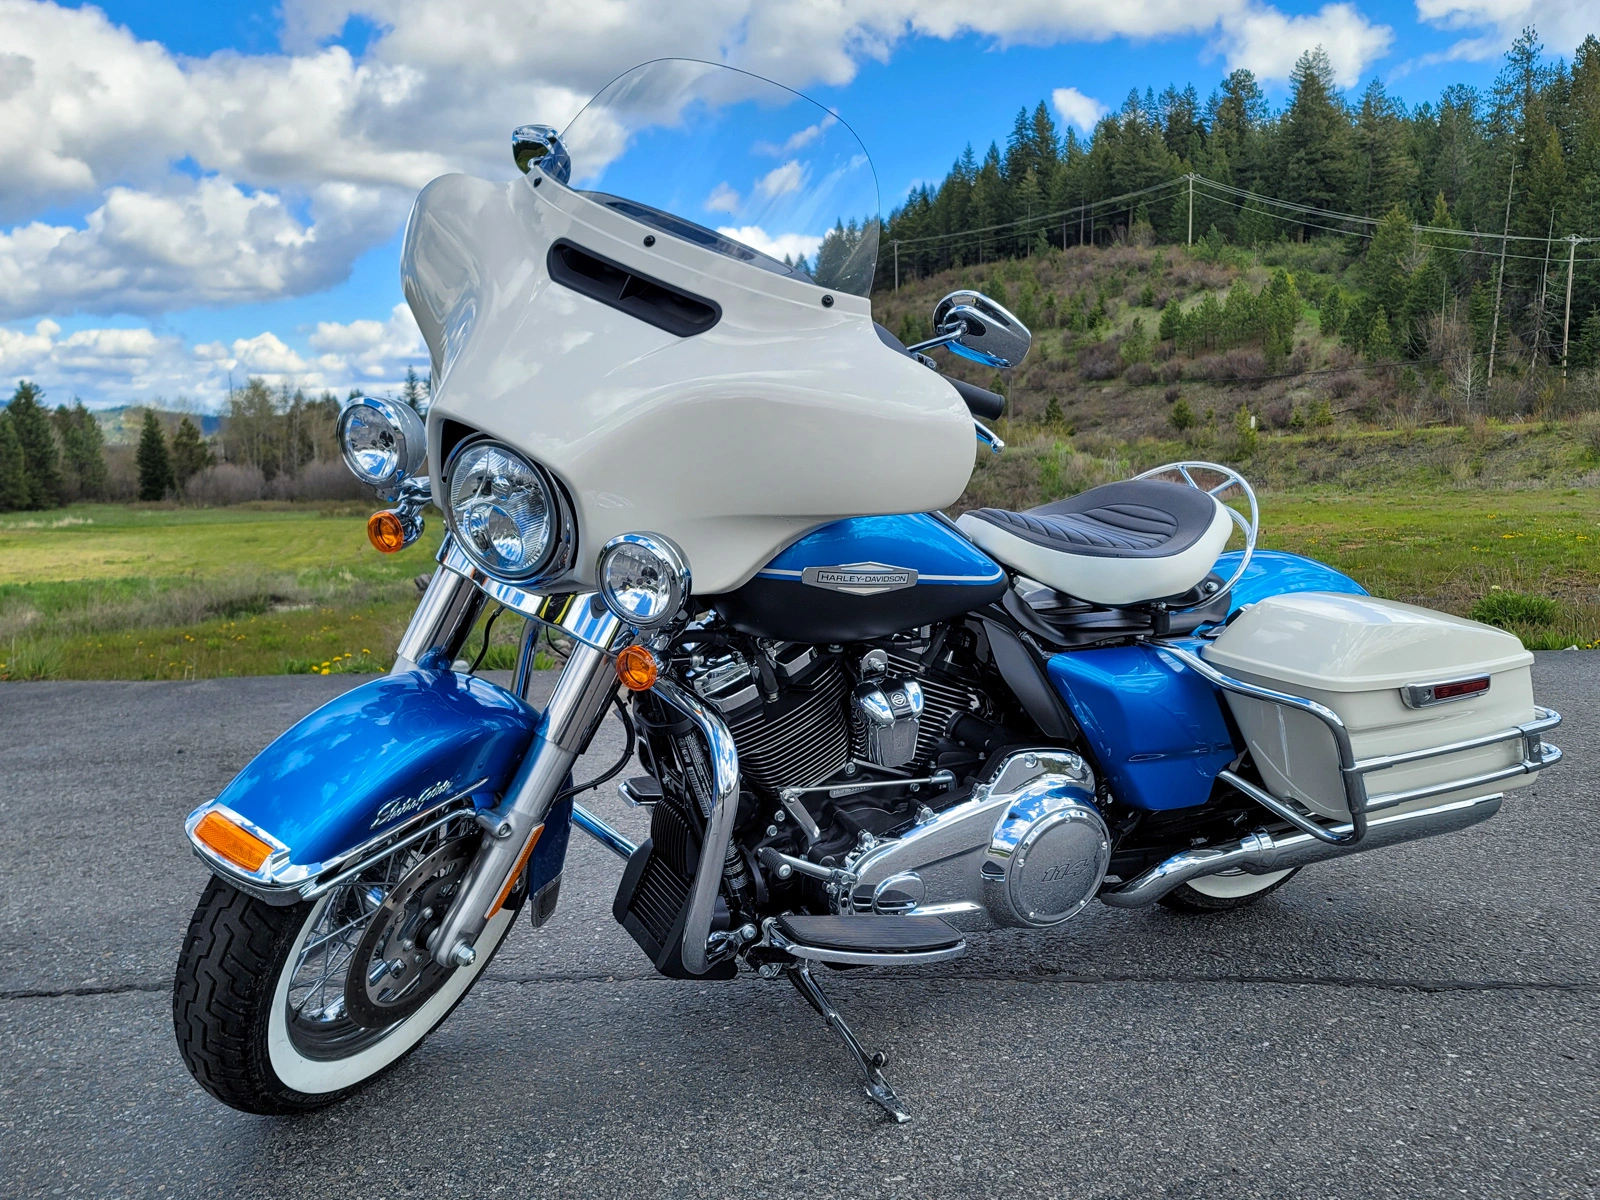 Harley-Davidson Electra Glide: The Pinnacle of Touring Comfort and Style